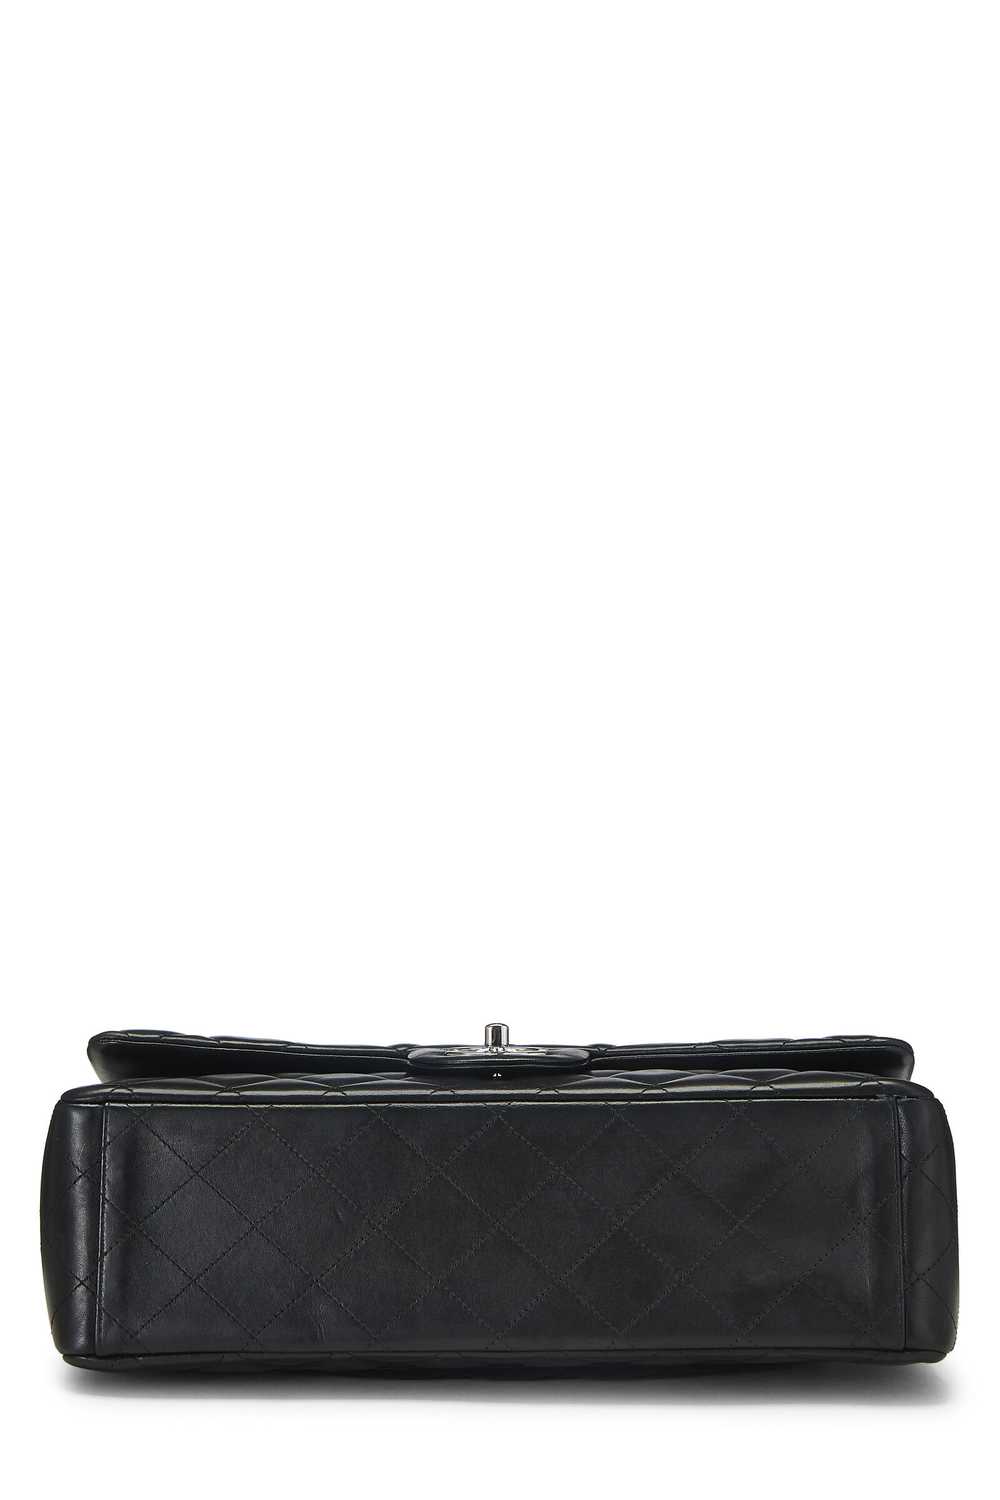 Black Quilted Lambskin New Classic Double Flap Ma… - image 6